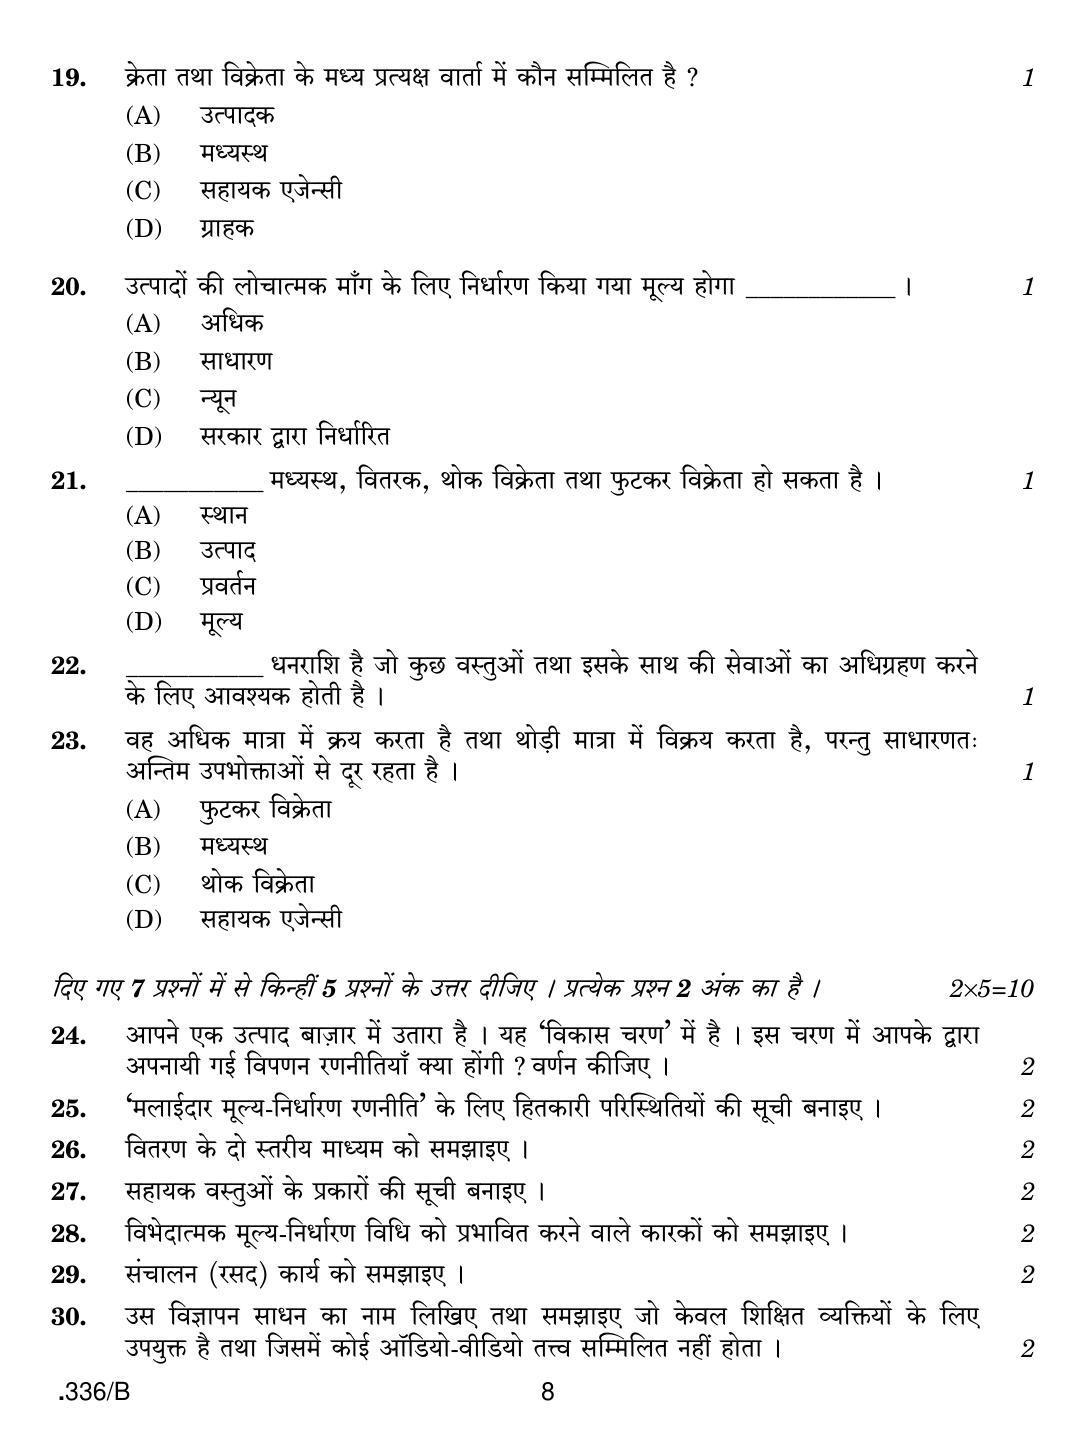 CBSE Class 12 Marketing 2020 Compartment Question Paper - Page 8